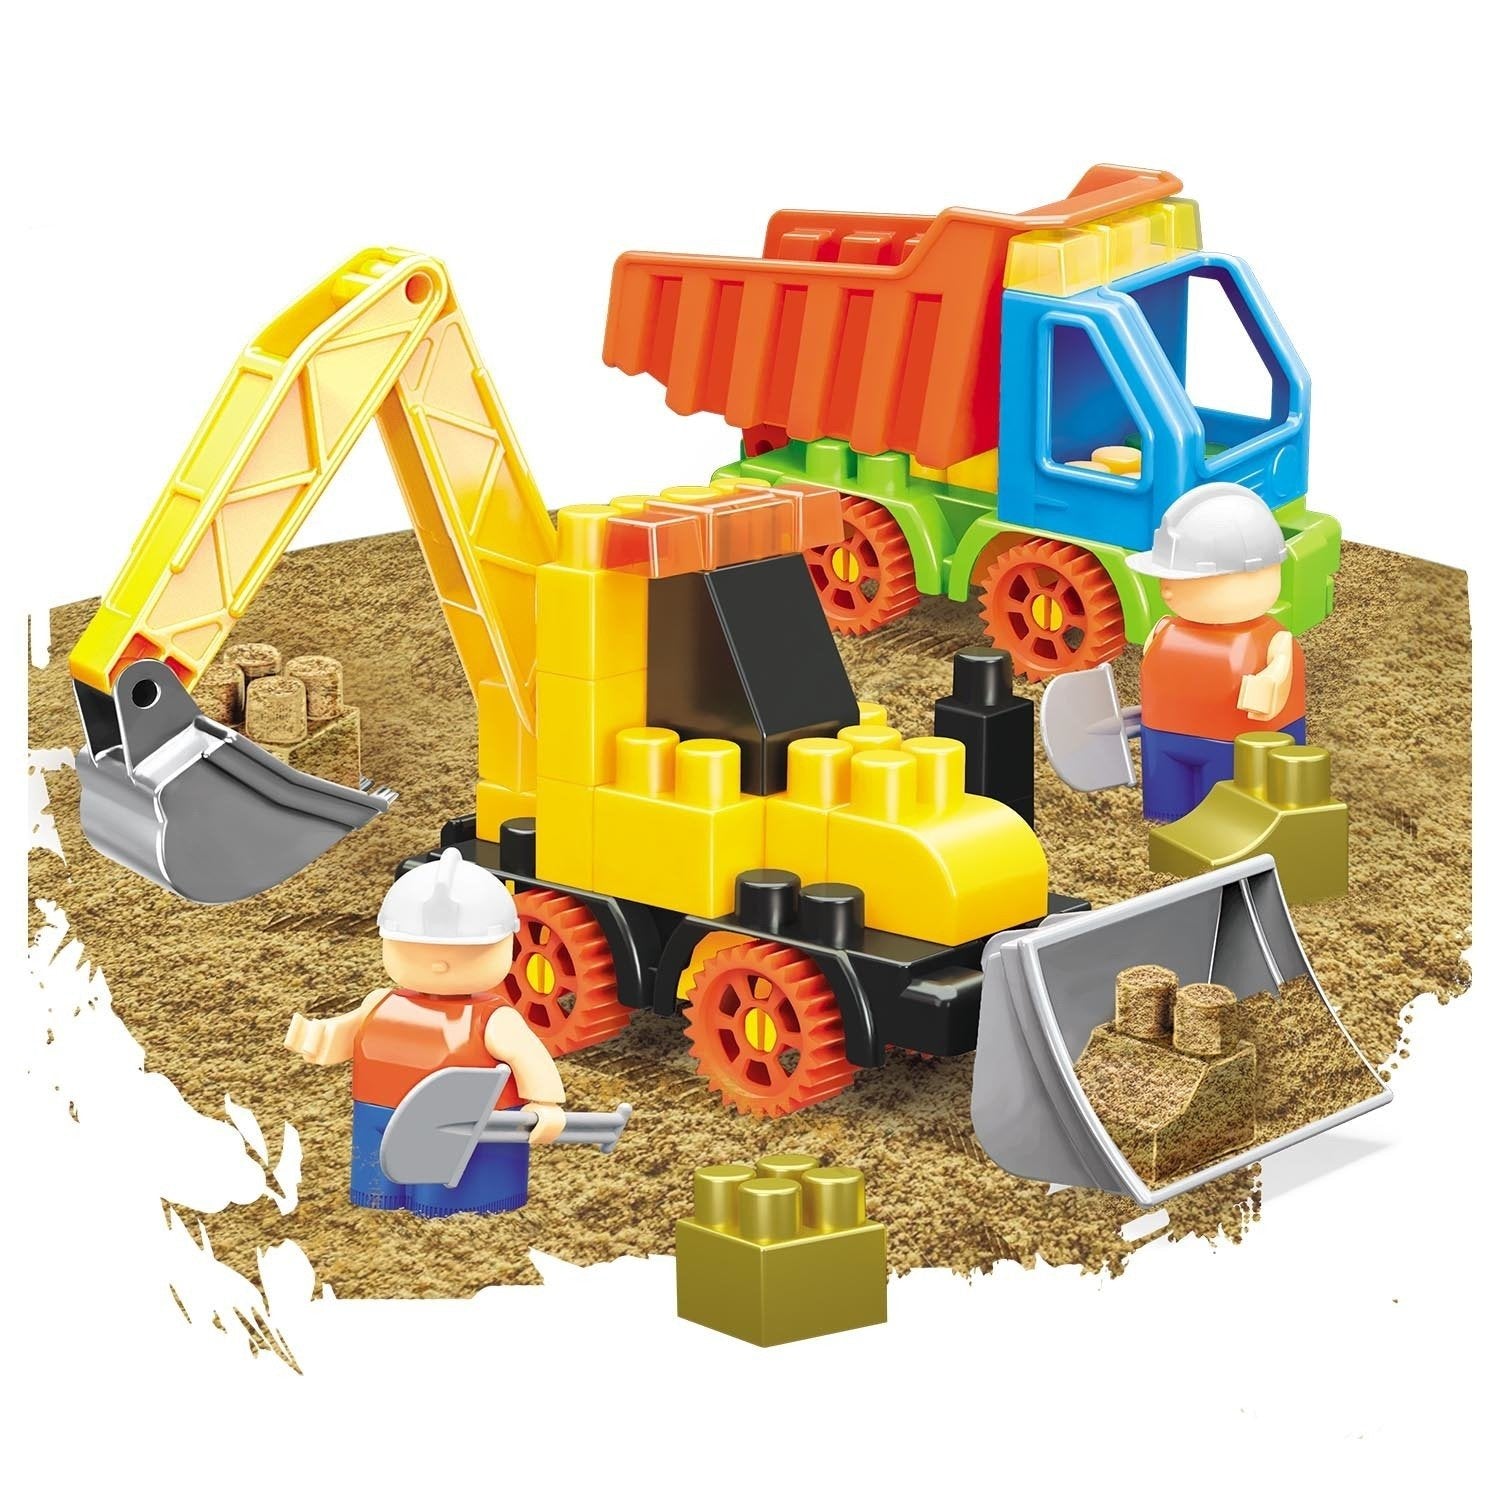 Kids Bauer Construction Vehicles Building Brick Blocks with Dynamic Sand Toy